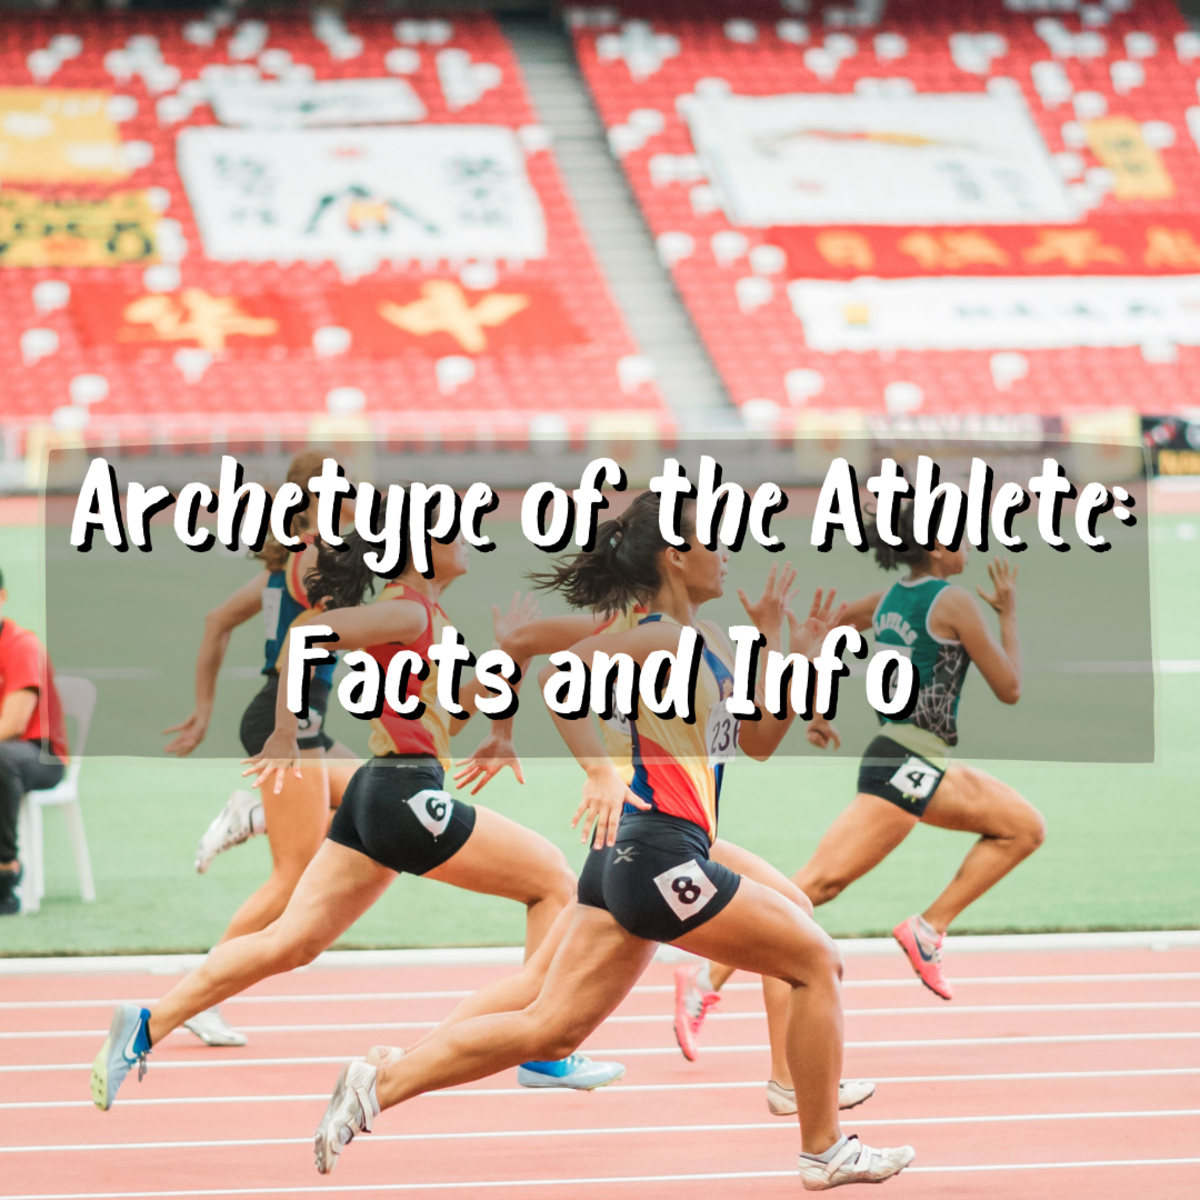 What Is the Athlete Archetype?